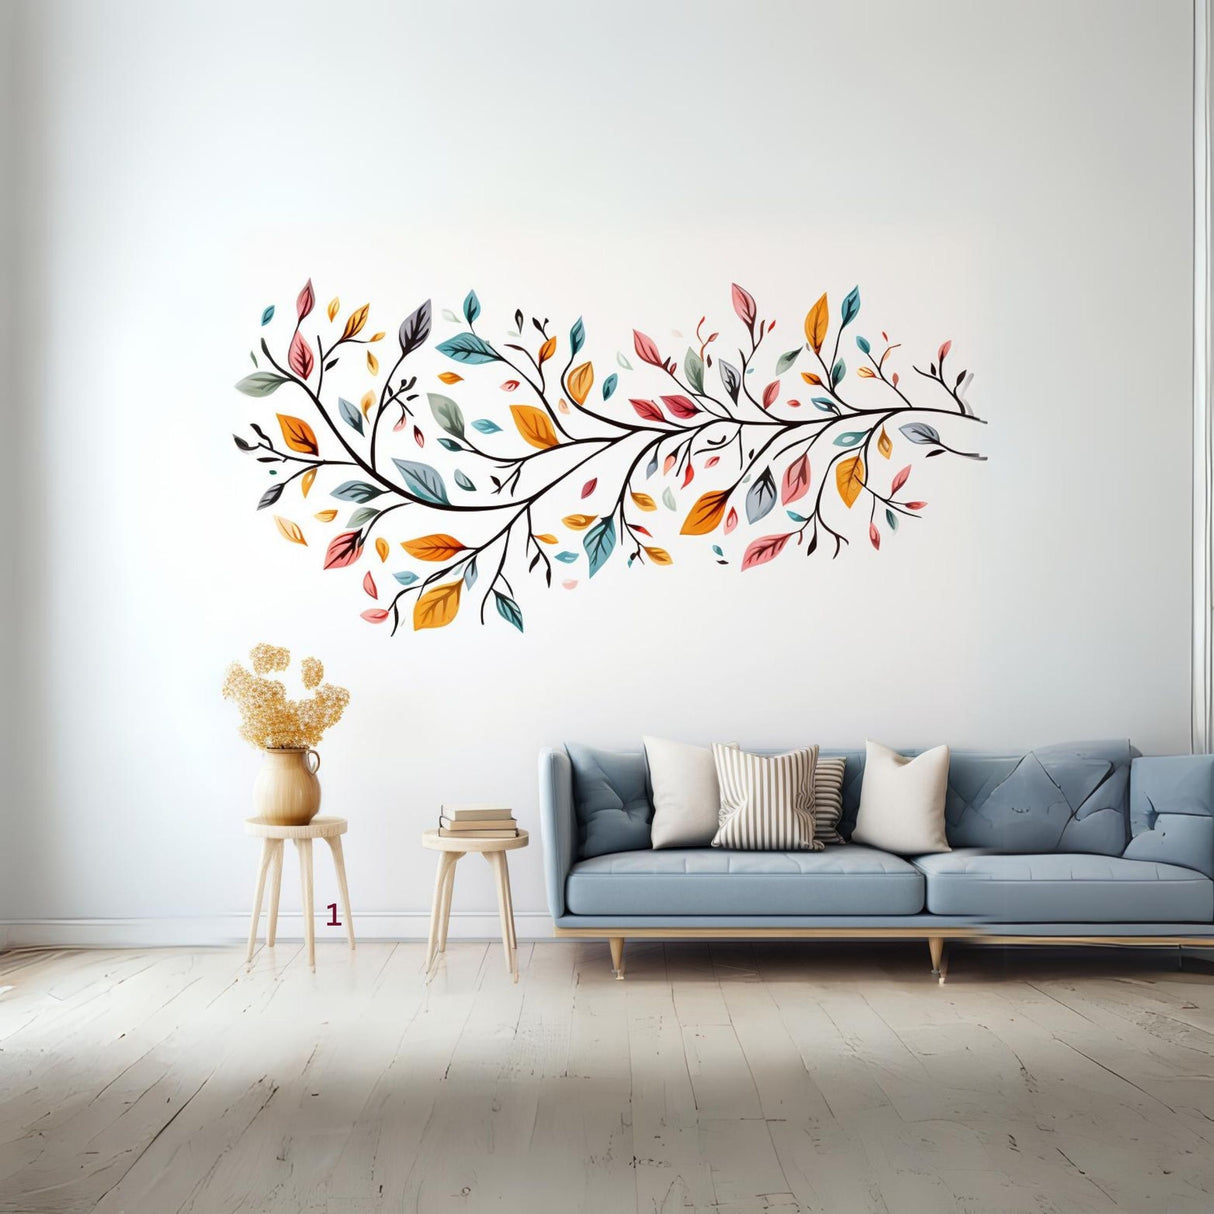 Stylized Tree Wall Sticker with Colorful Leaves - Modern and Artistic Vinyl Decal for Room Decor